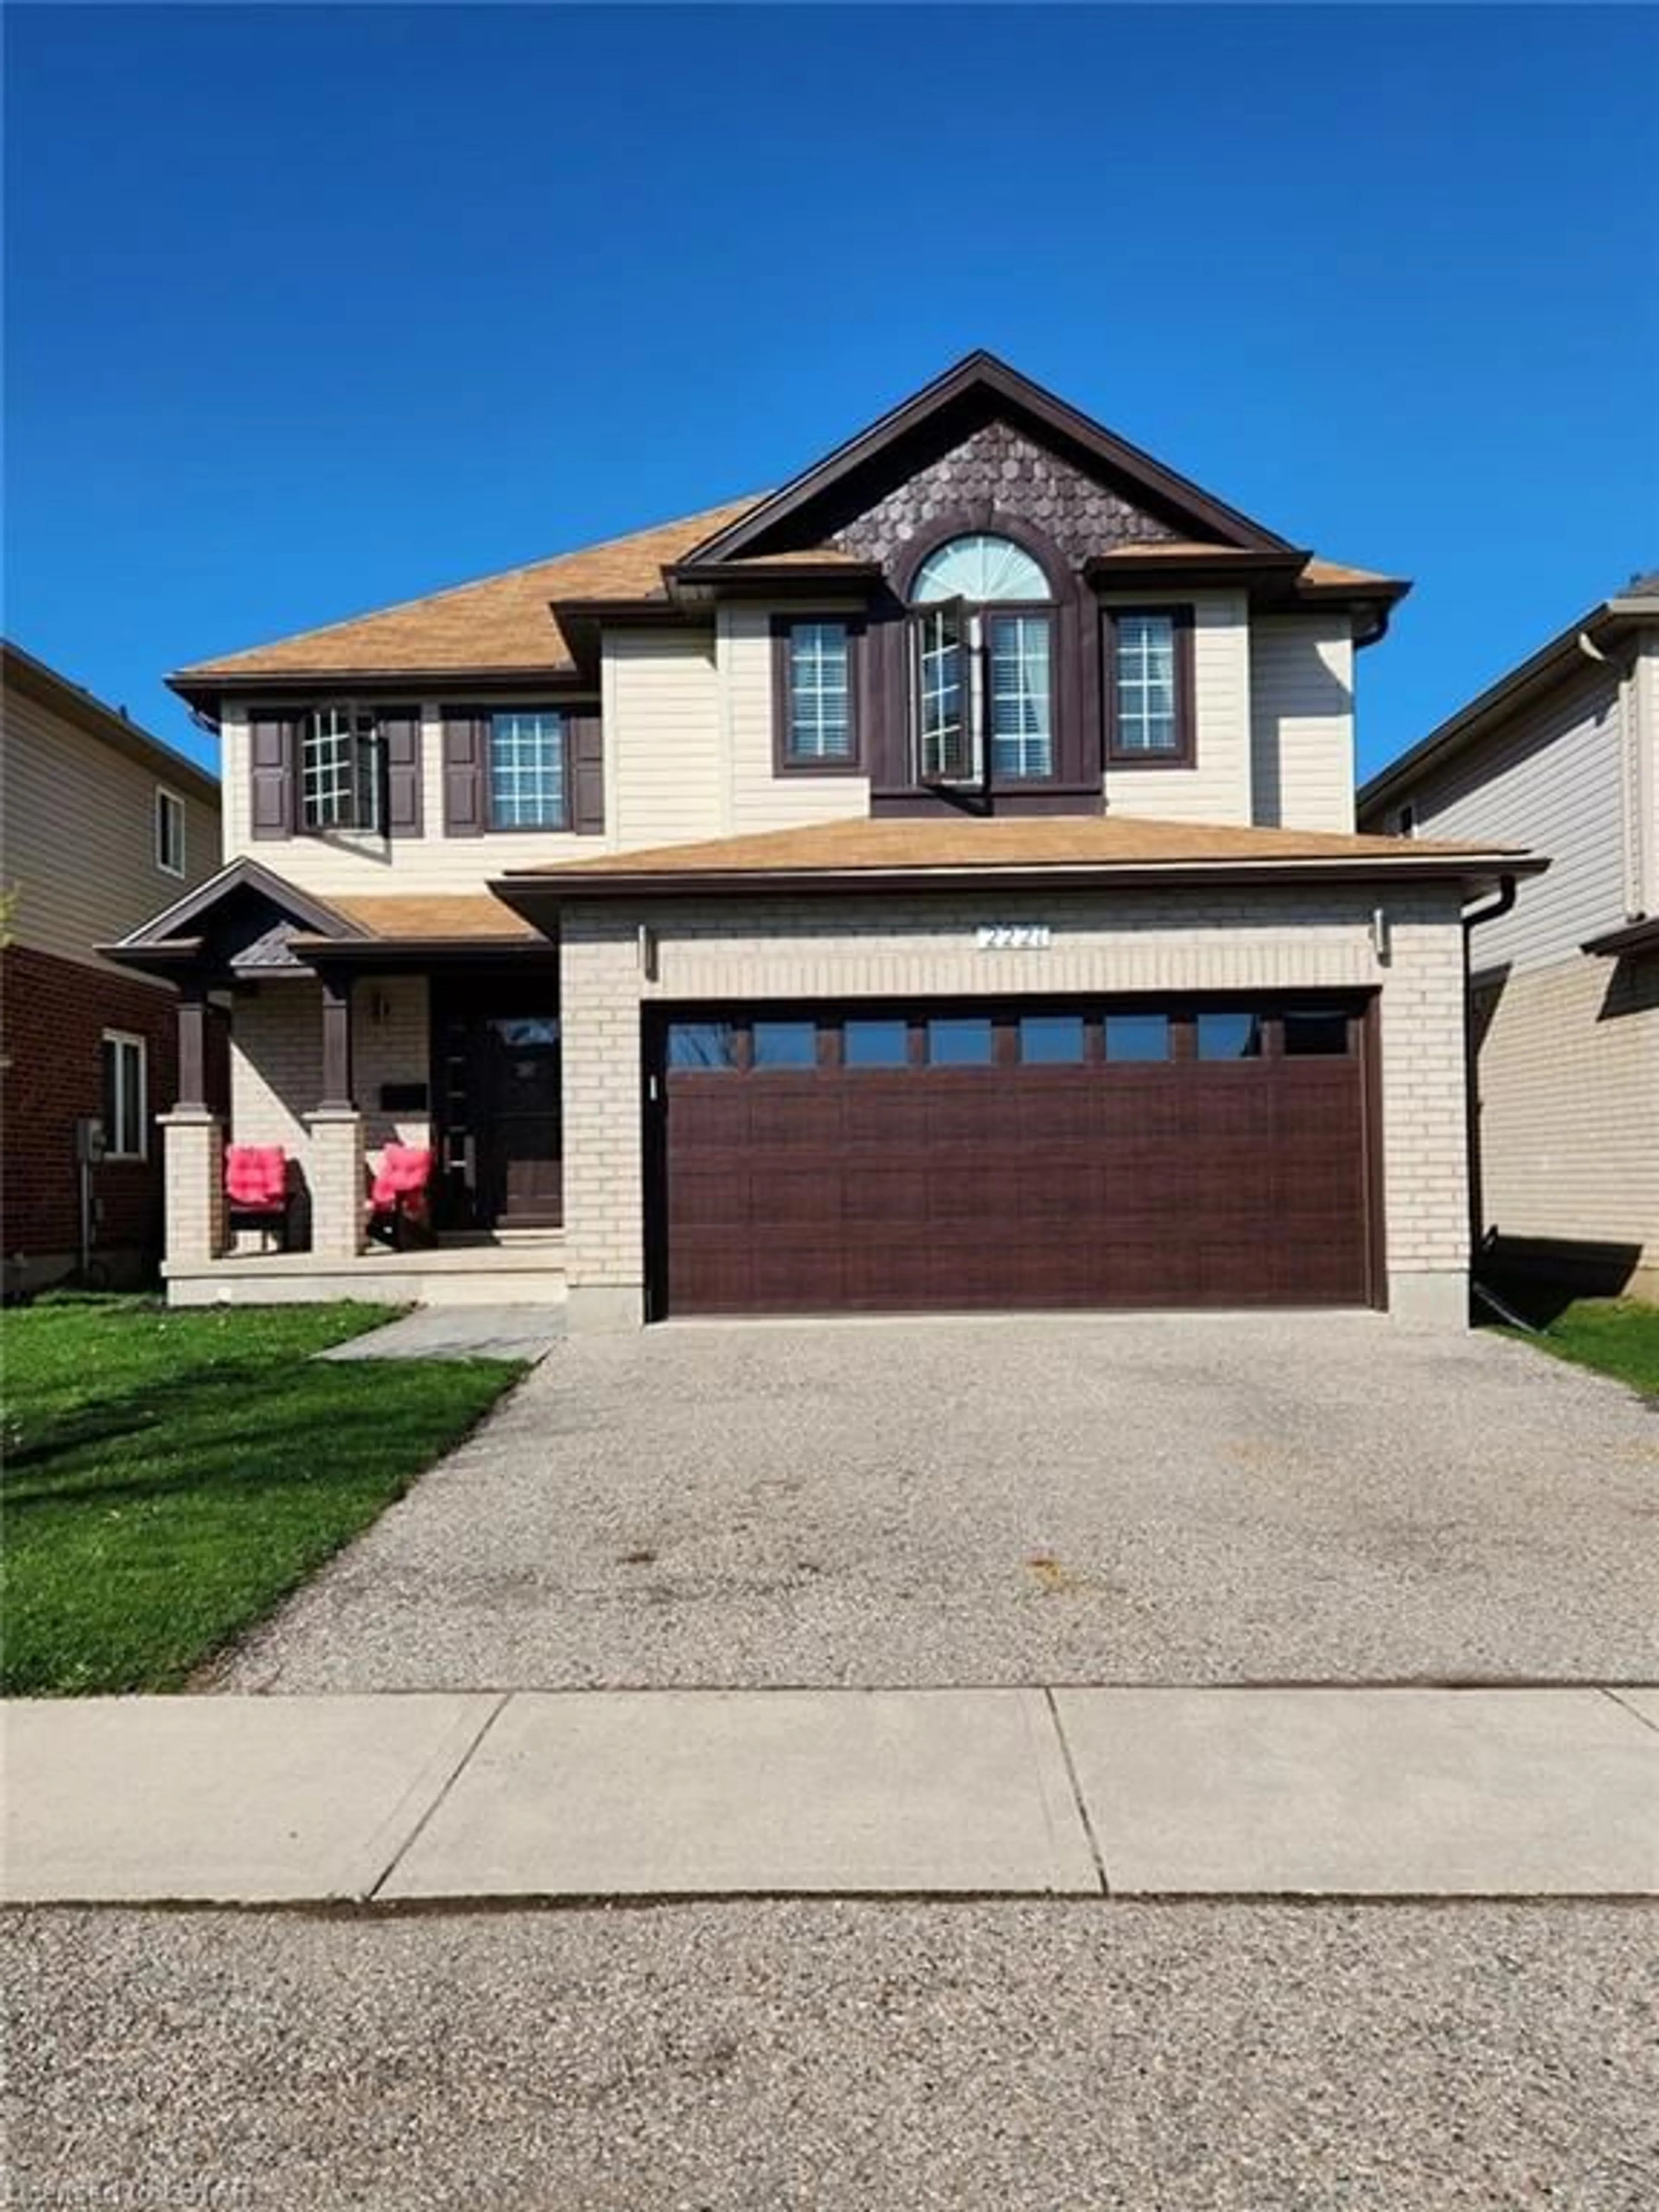 Frontside or backside of a home for 2221 Lilac Ave, London Ontario N6K 5C5